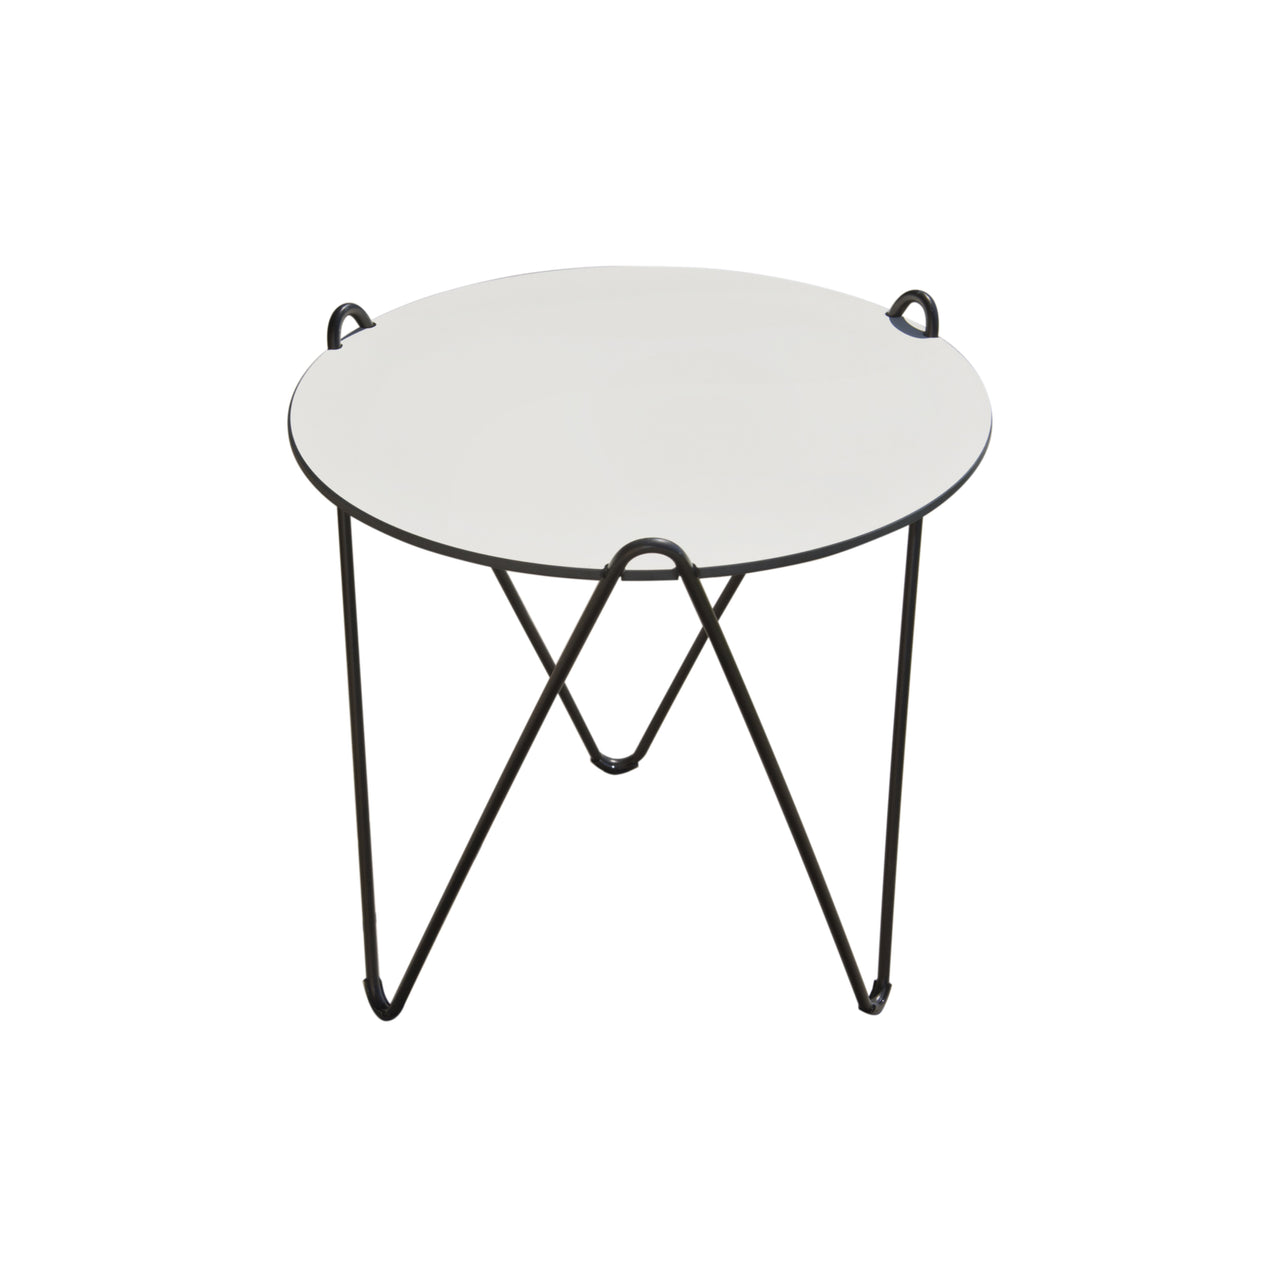 Circus Side Table: Large - 23.6